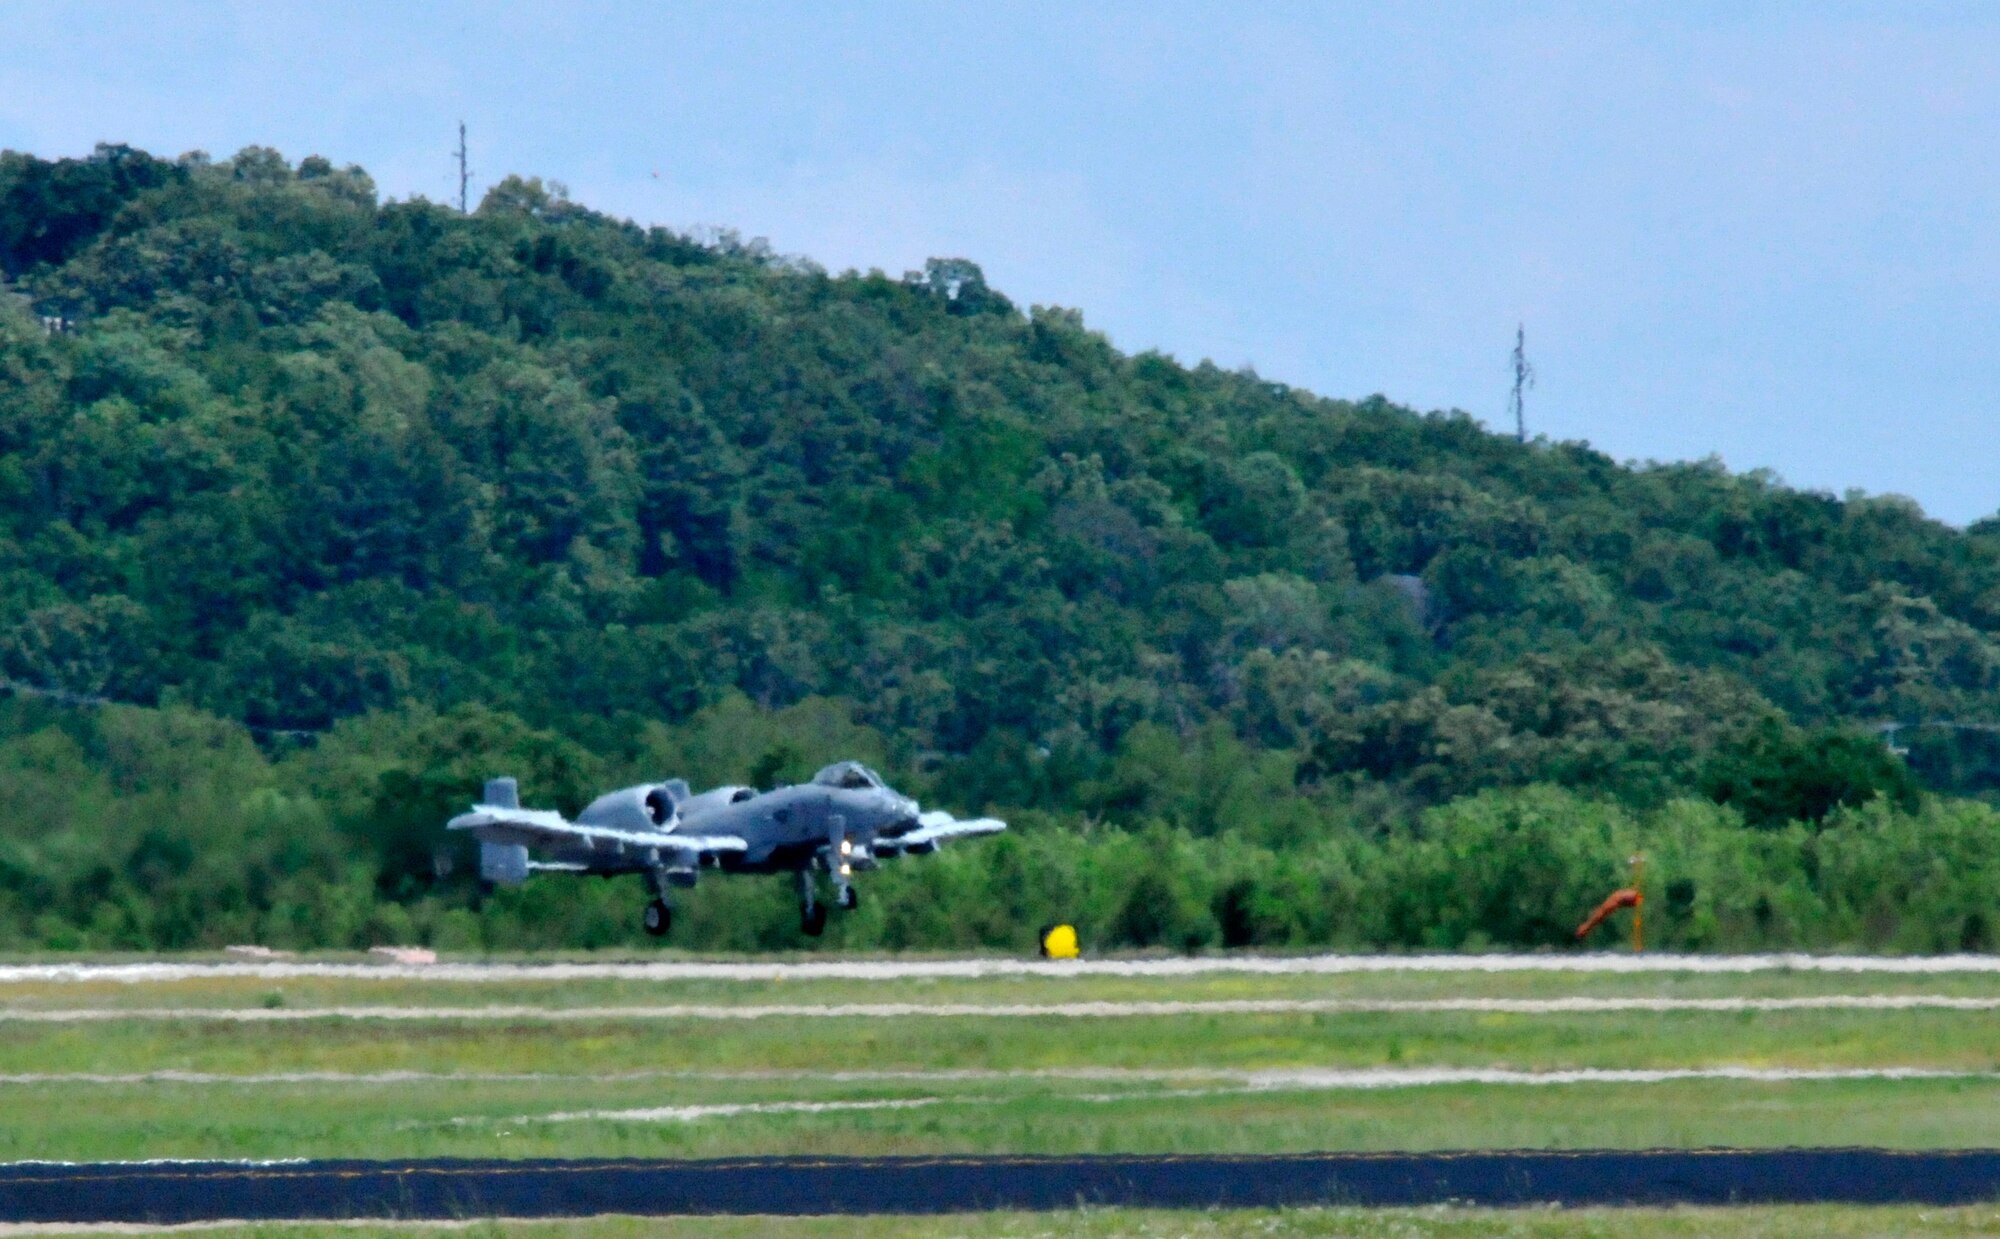 Col. Brian T. Burger, 188th Operations Group commander, conducted his ceremonial fini (final) training flight in the A-10C Thunderbolt II “Warthog” (Tail No. 646) May 15, 2014, at Ebbing Air National Guard Base, Fort Smith, Arkansas. Burger has flown the Warthog longer than any 188th pilot. The last two A-10s depart Fort Smith June 7, 2014, as the 188th transitions from a fighter mission to an intelligence, reconnaissance and surveillance/ remotely piloted aircraft mission. (U.S. Air National Guard photo by Tech Sgt. Josh Lewis/Released)